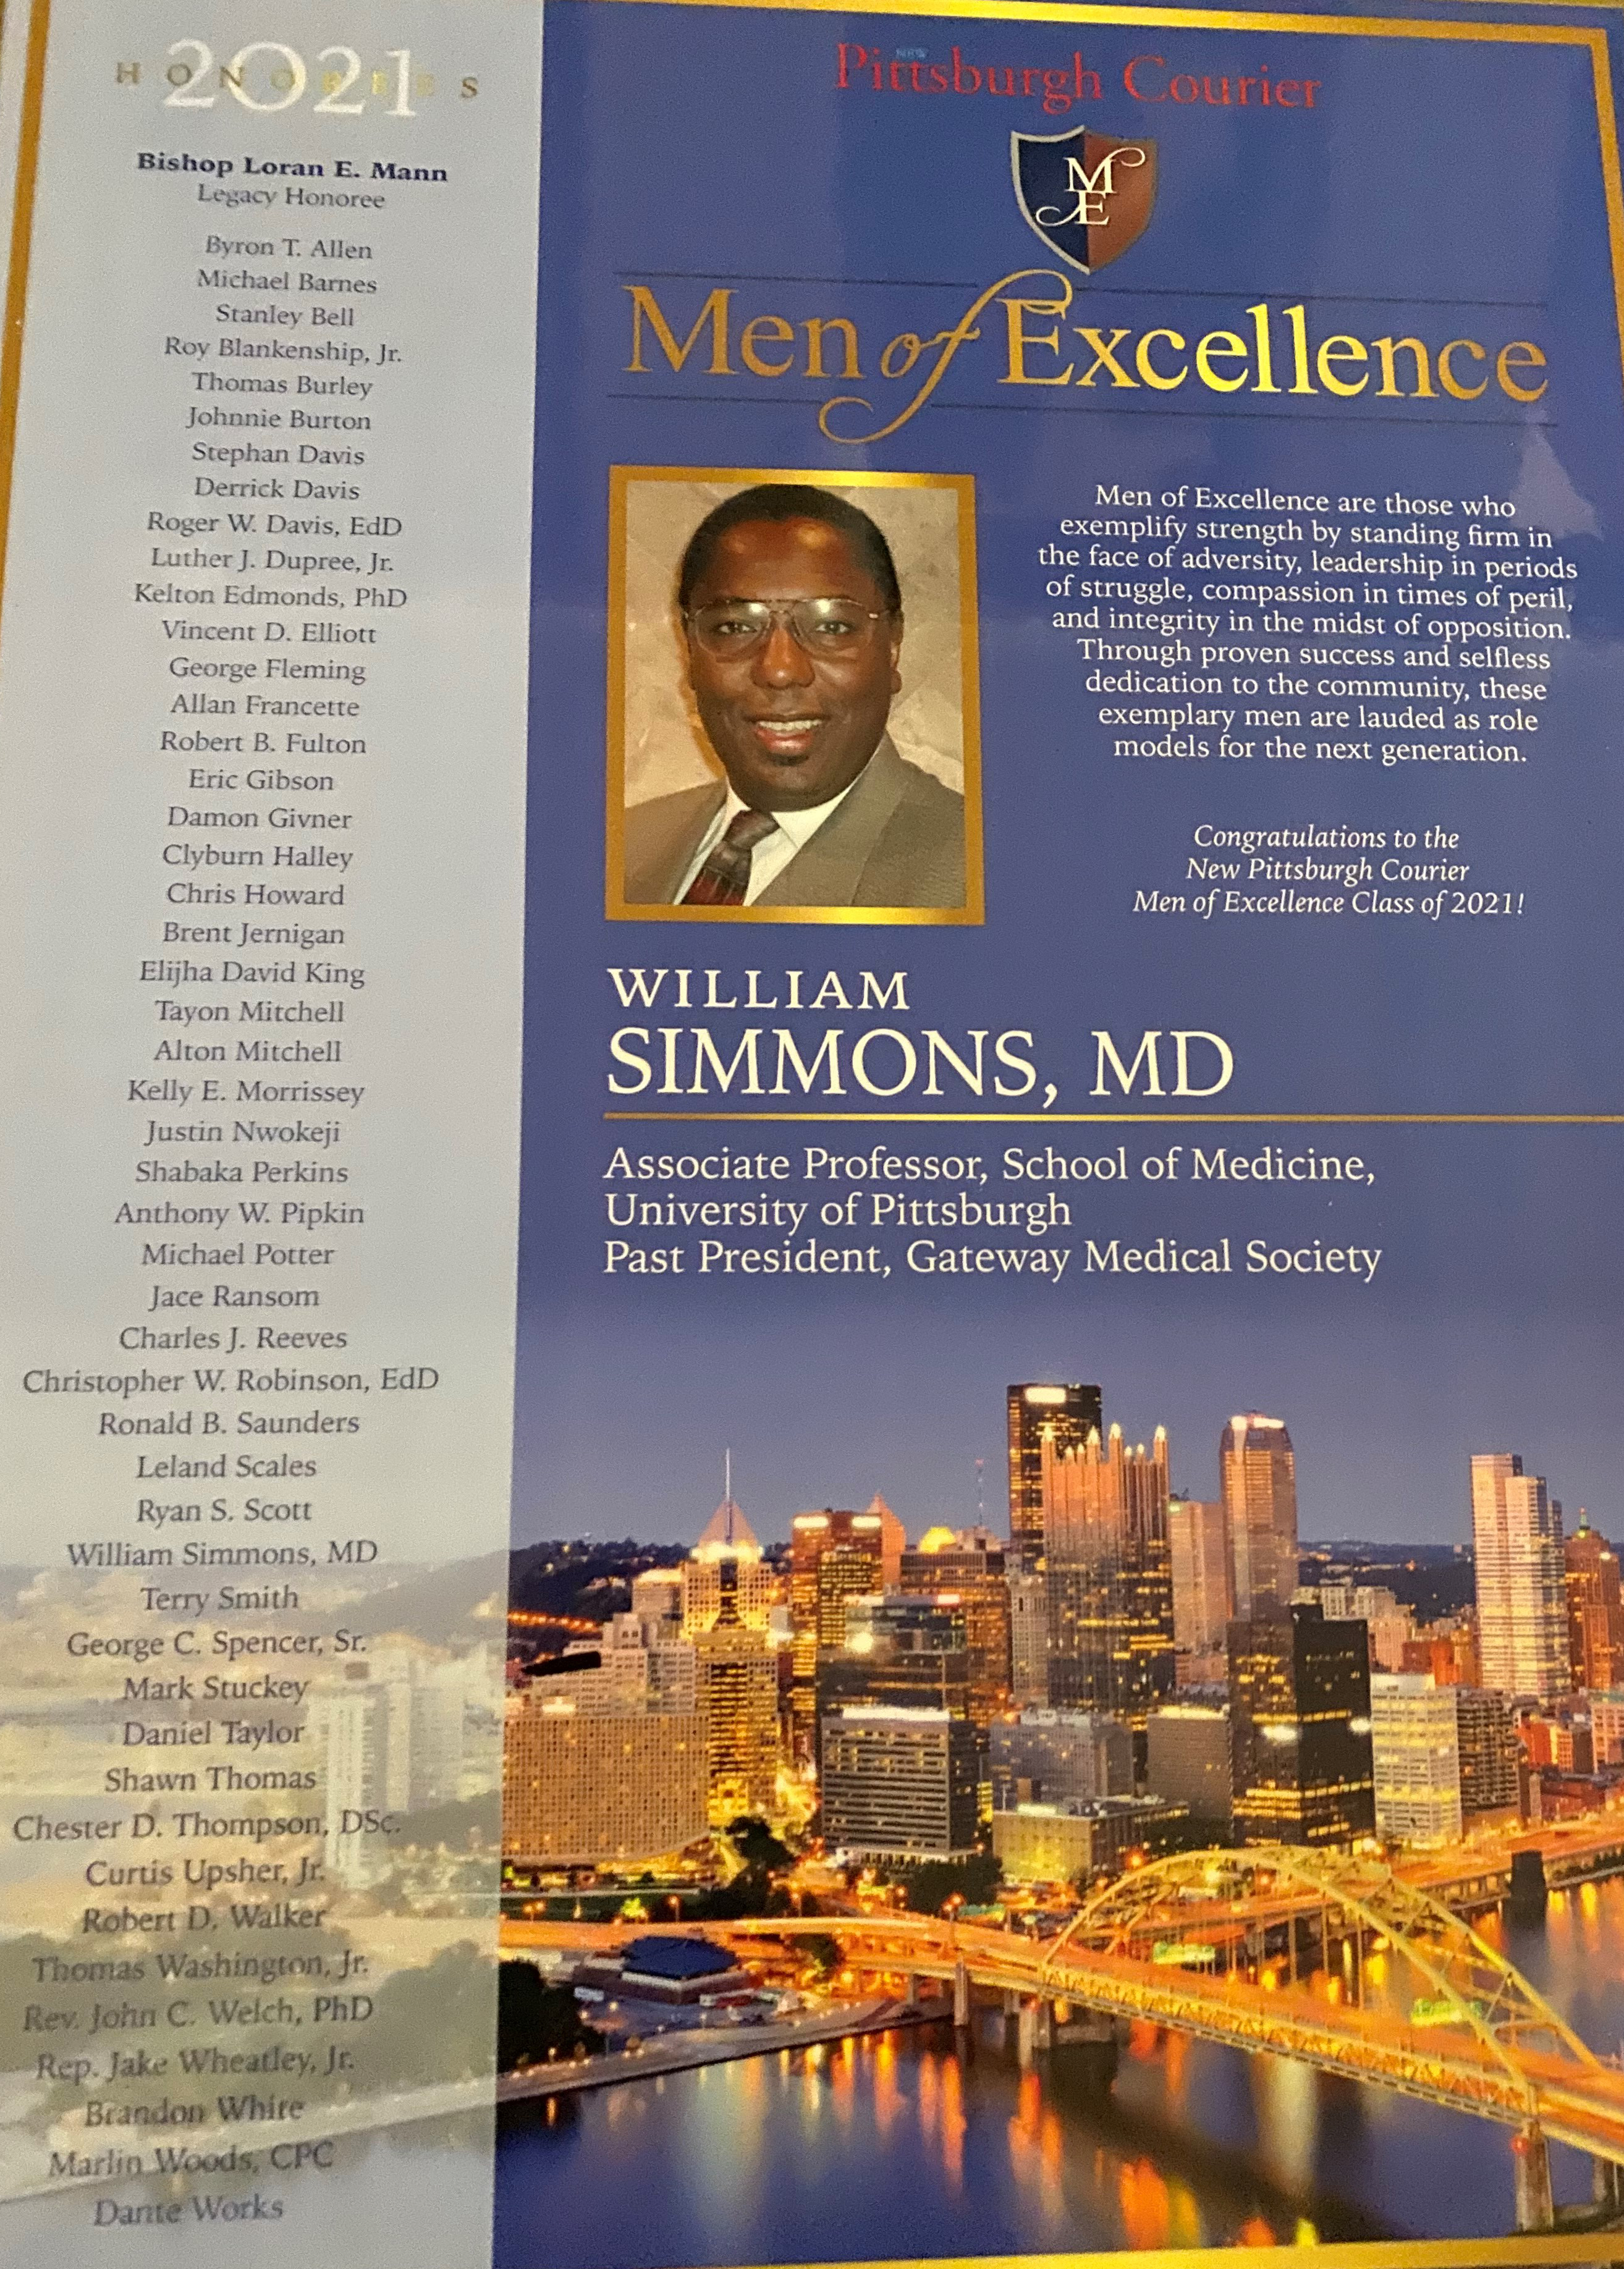 "A picture of Doctor Simmons with congratulatory text from the Pittsburgh Courier's Men of Excellence award"